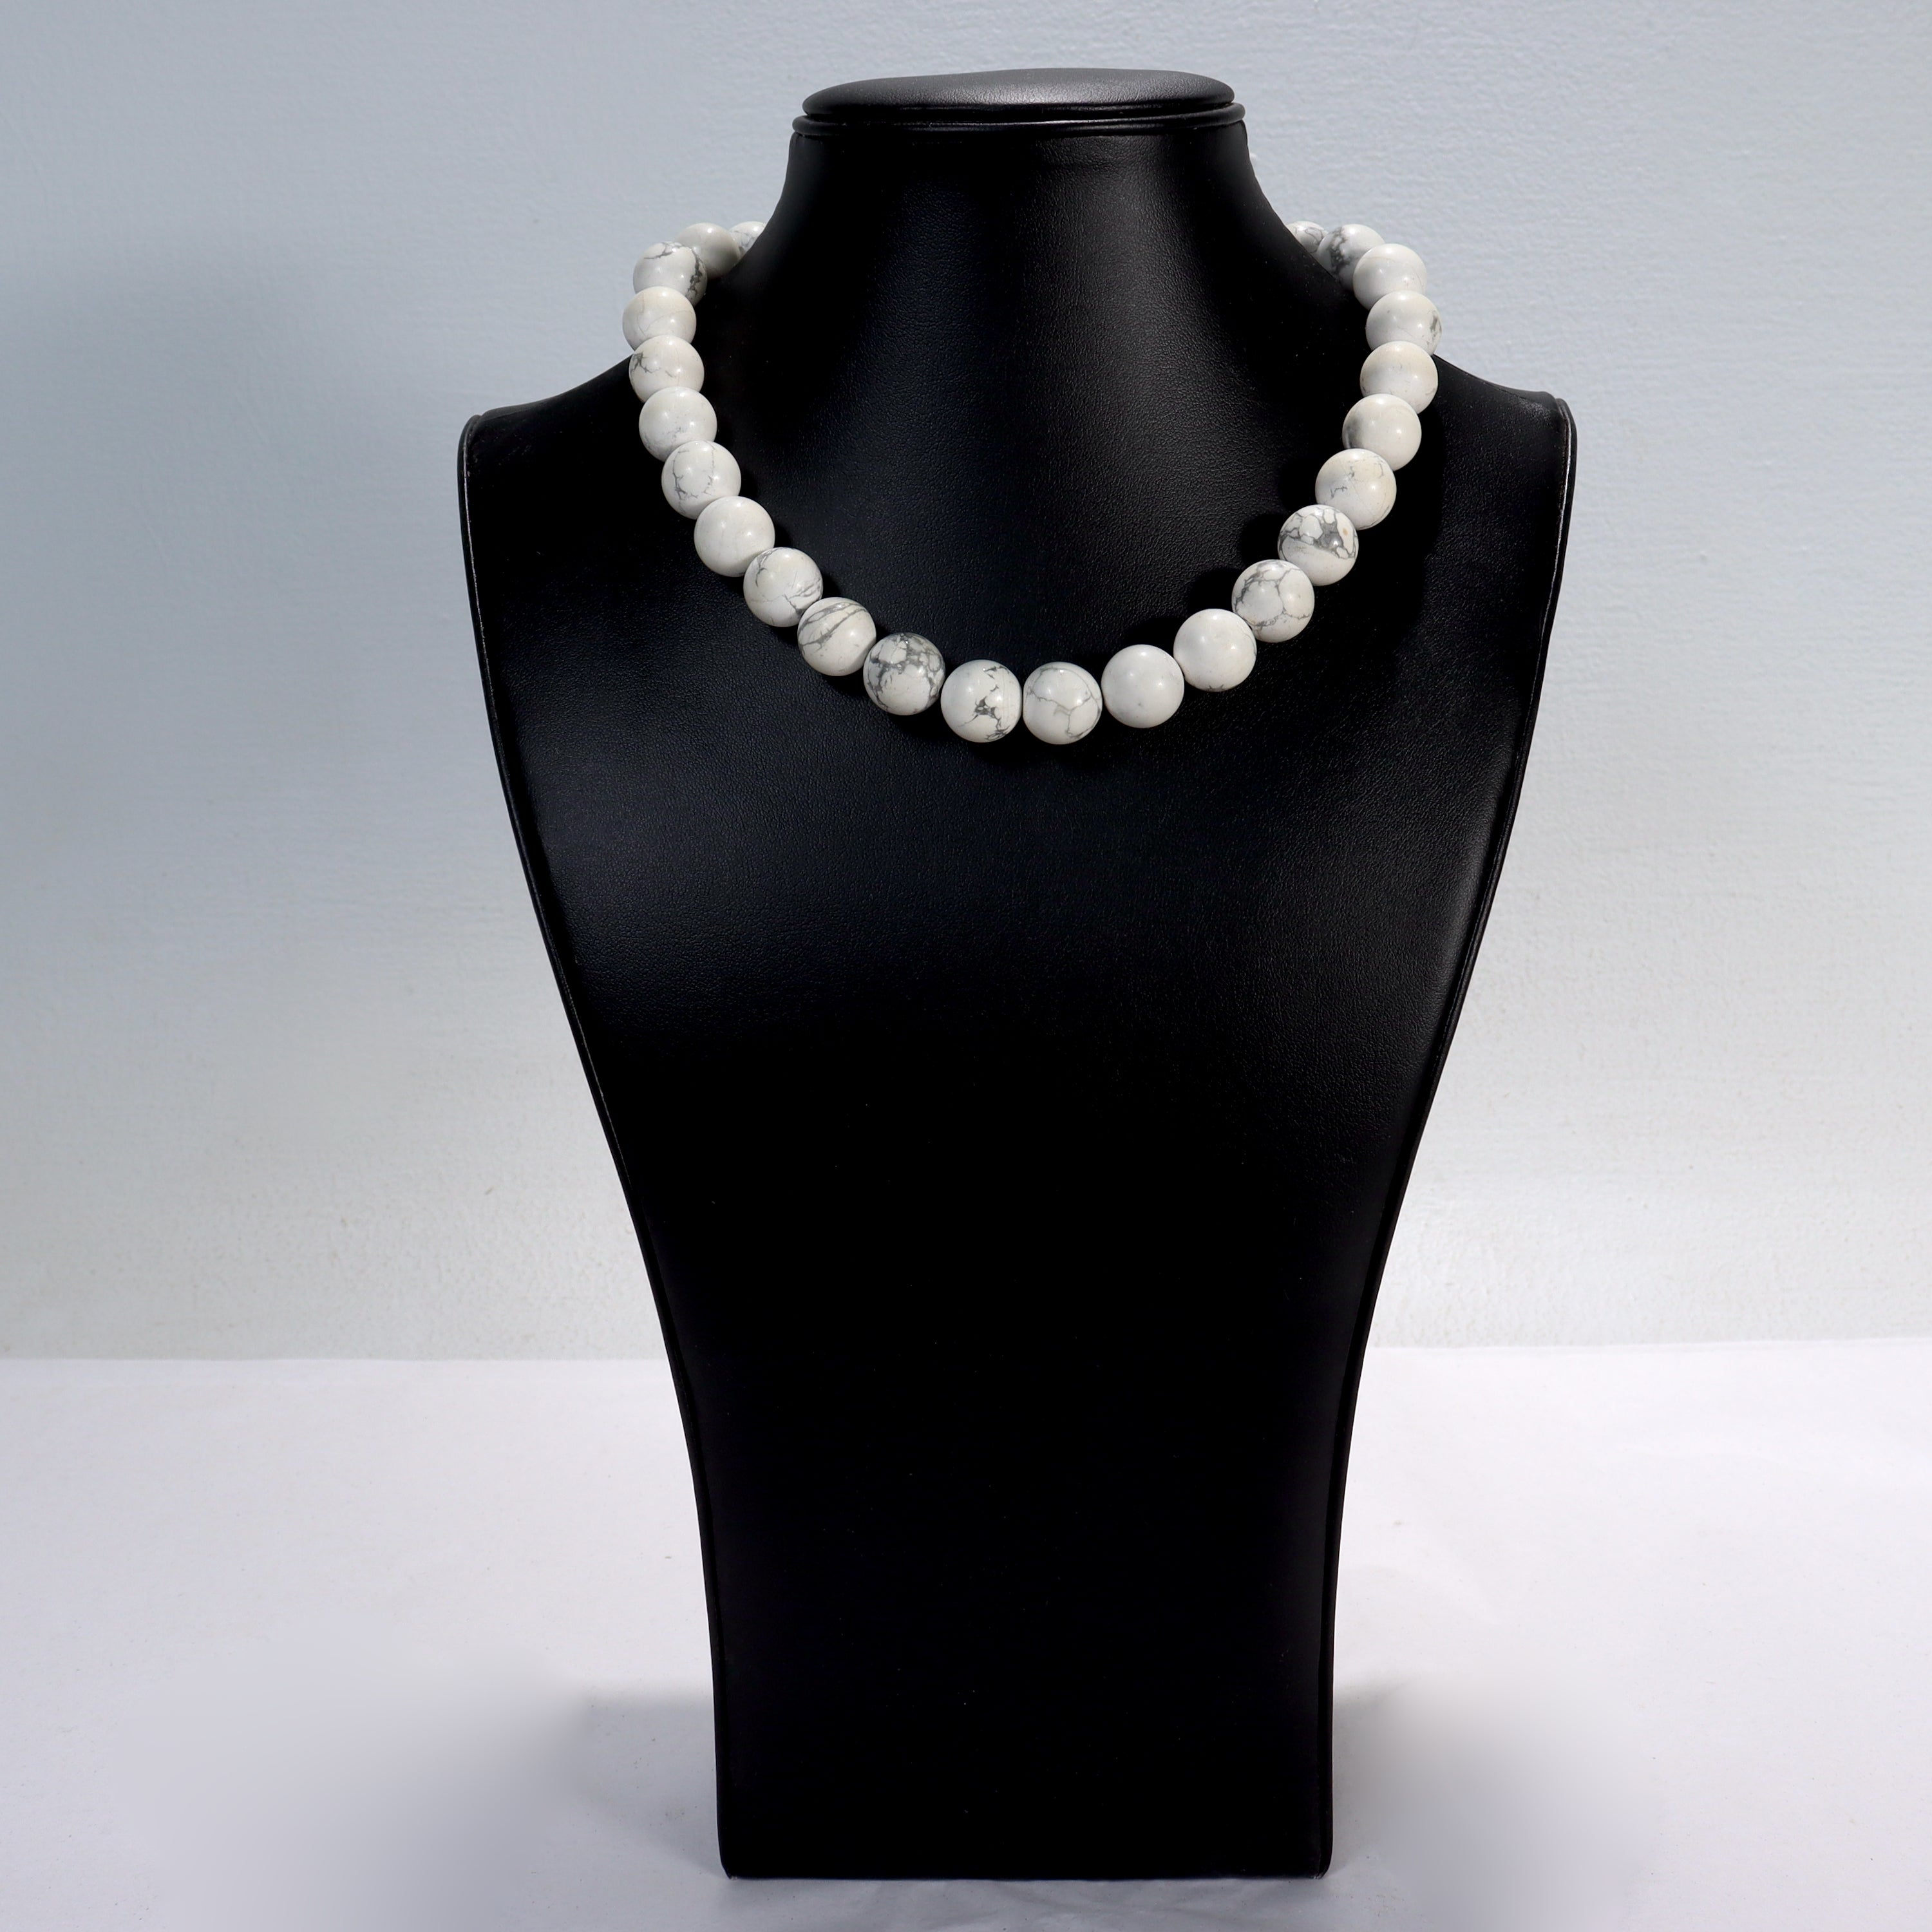 A fine Tiffany & Co. necklace.

With large howlite beads secured by a twisted sterling silver toggle clasp.

Simply a wonderful Tiffany necklace! 

Date:
1990s

Overall Condition:
It is in overall good, as-pictured, used estate condition with some